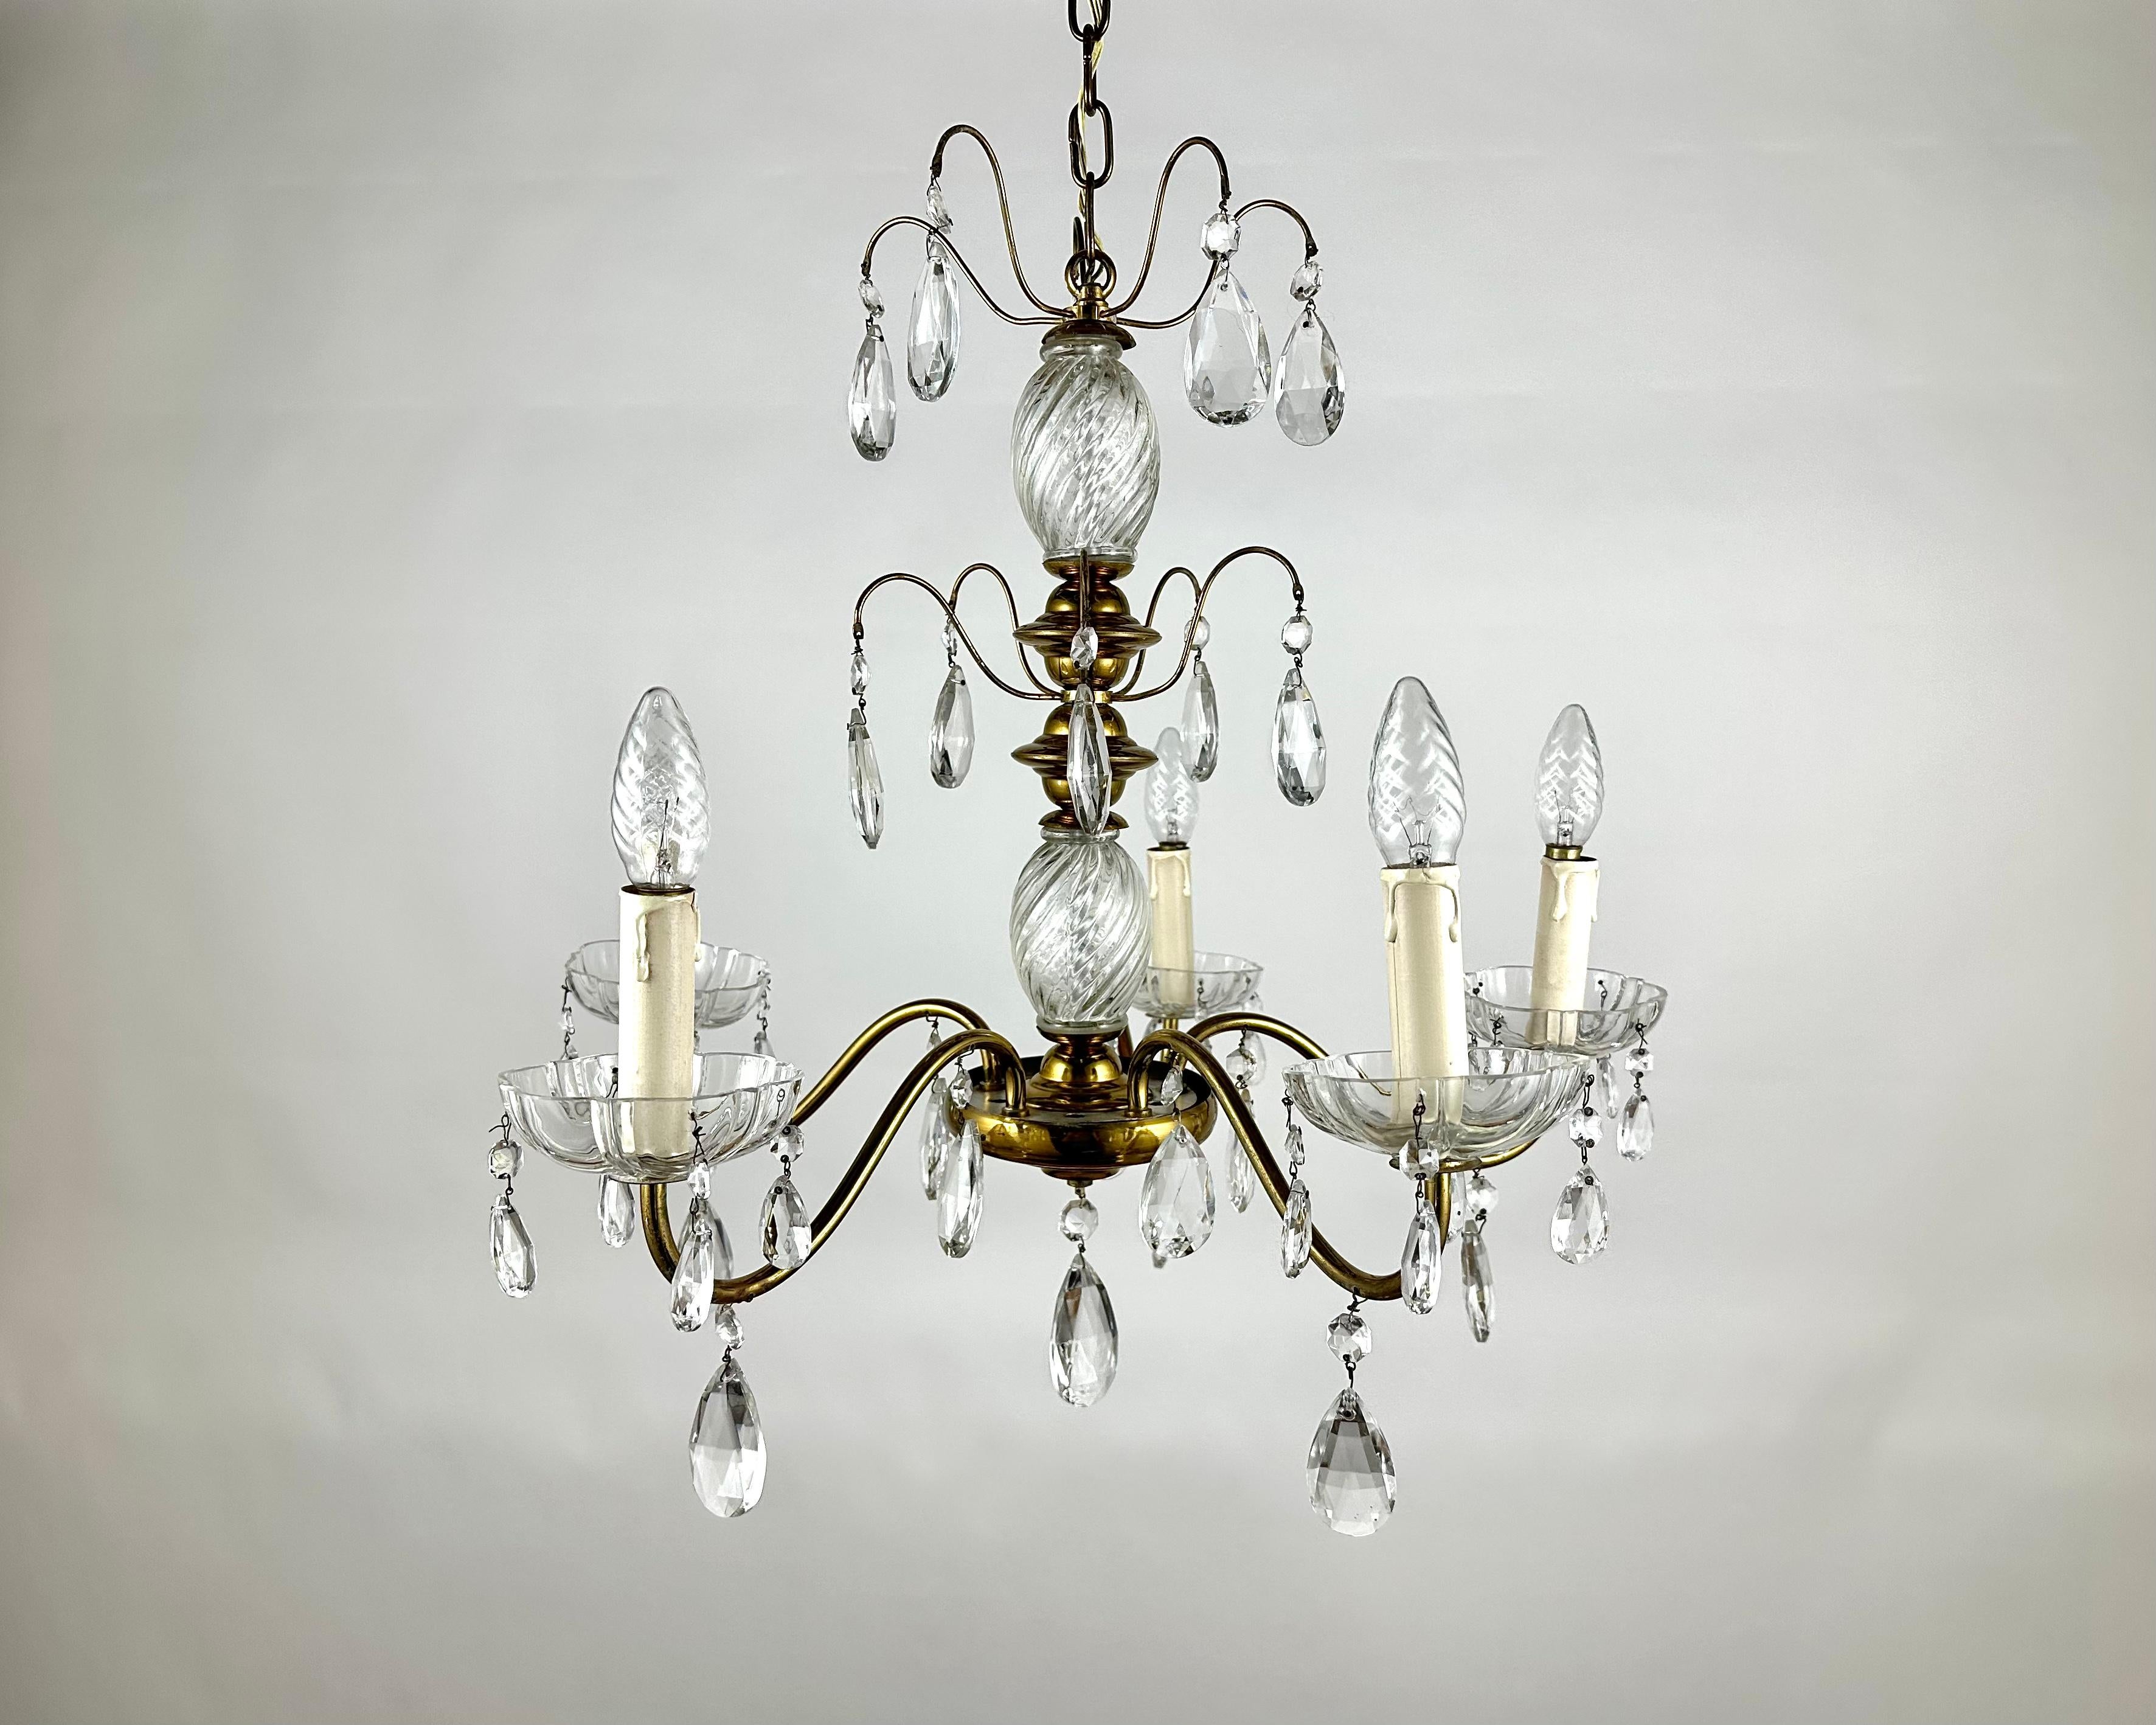 Circa 1920s Classic Style Chandelier with five light bulbs.

Manufactured in France.

Richly fecorated chandelier's framework is in gilt brass with transparent cut crystal decorations that capture and reflect the light of the bulbs.

This chandelier